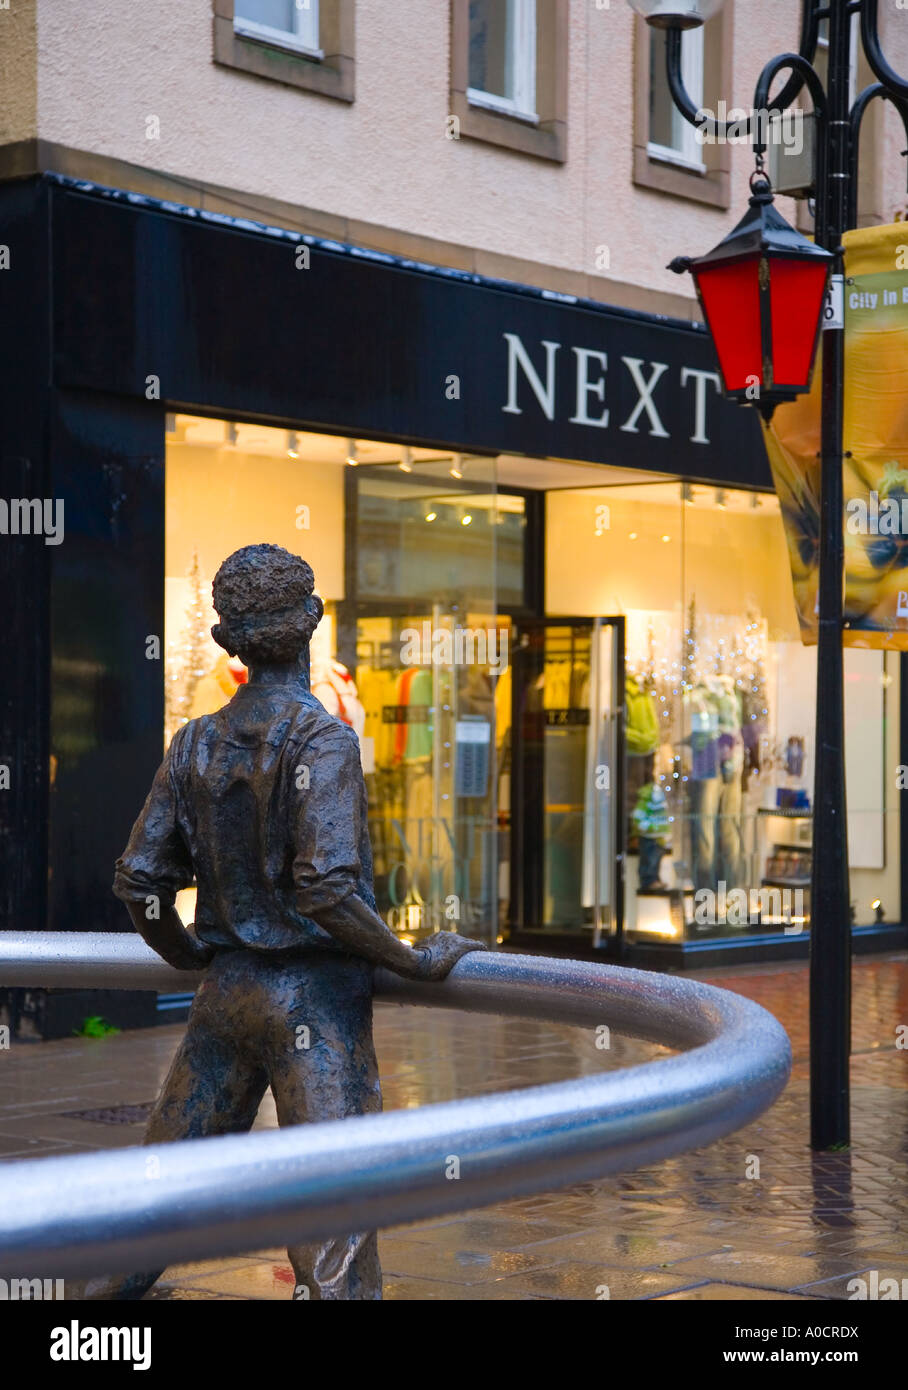 'Nae Day Sae Dark' in pensive man in Perth city centre, public art steel ring statue, Christmas decorations and festive street lighting Perthshire UK Stock Photo